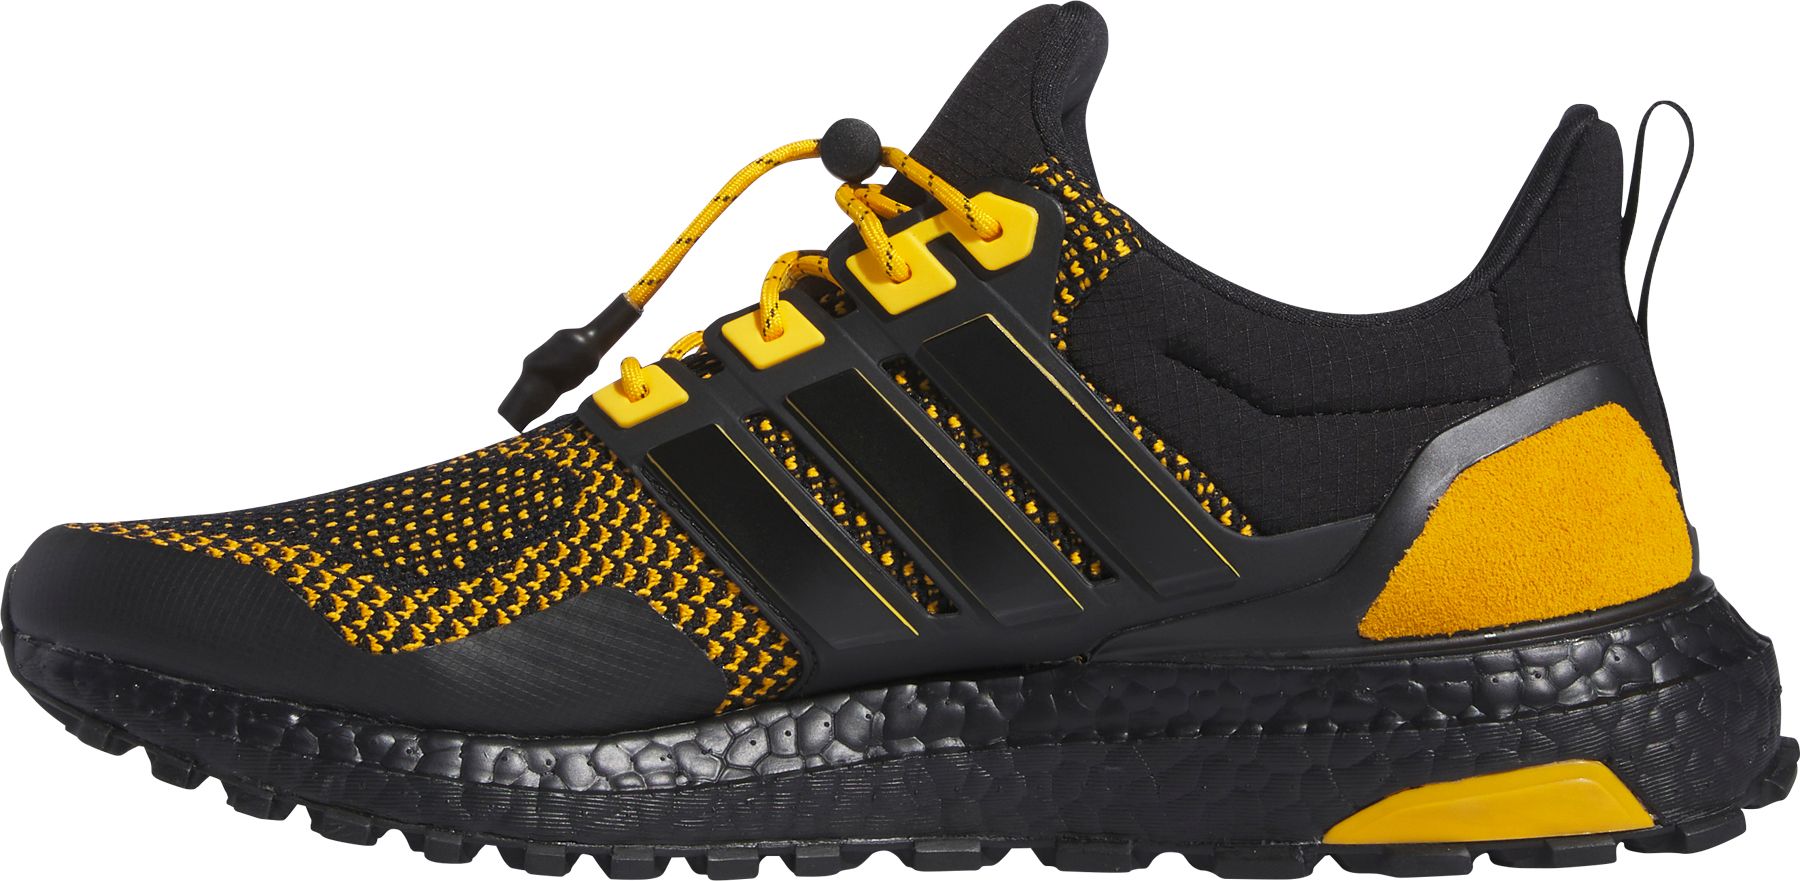 Adidas Ultraboost 1.0 Grambling State Shoes | The Market Place